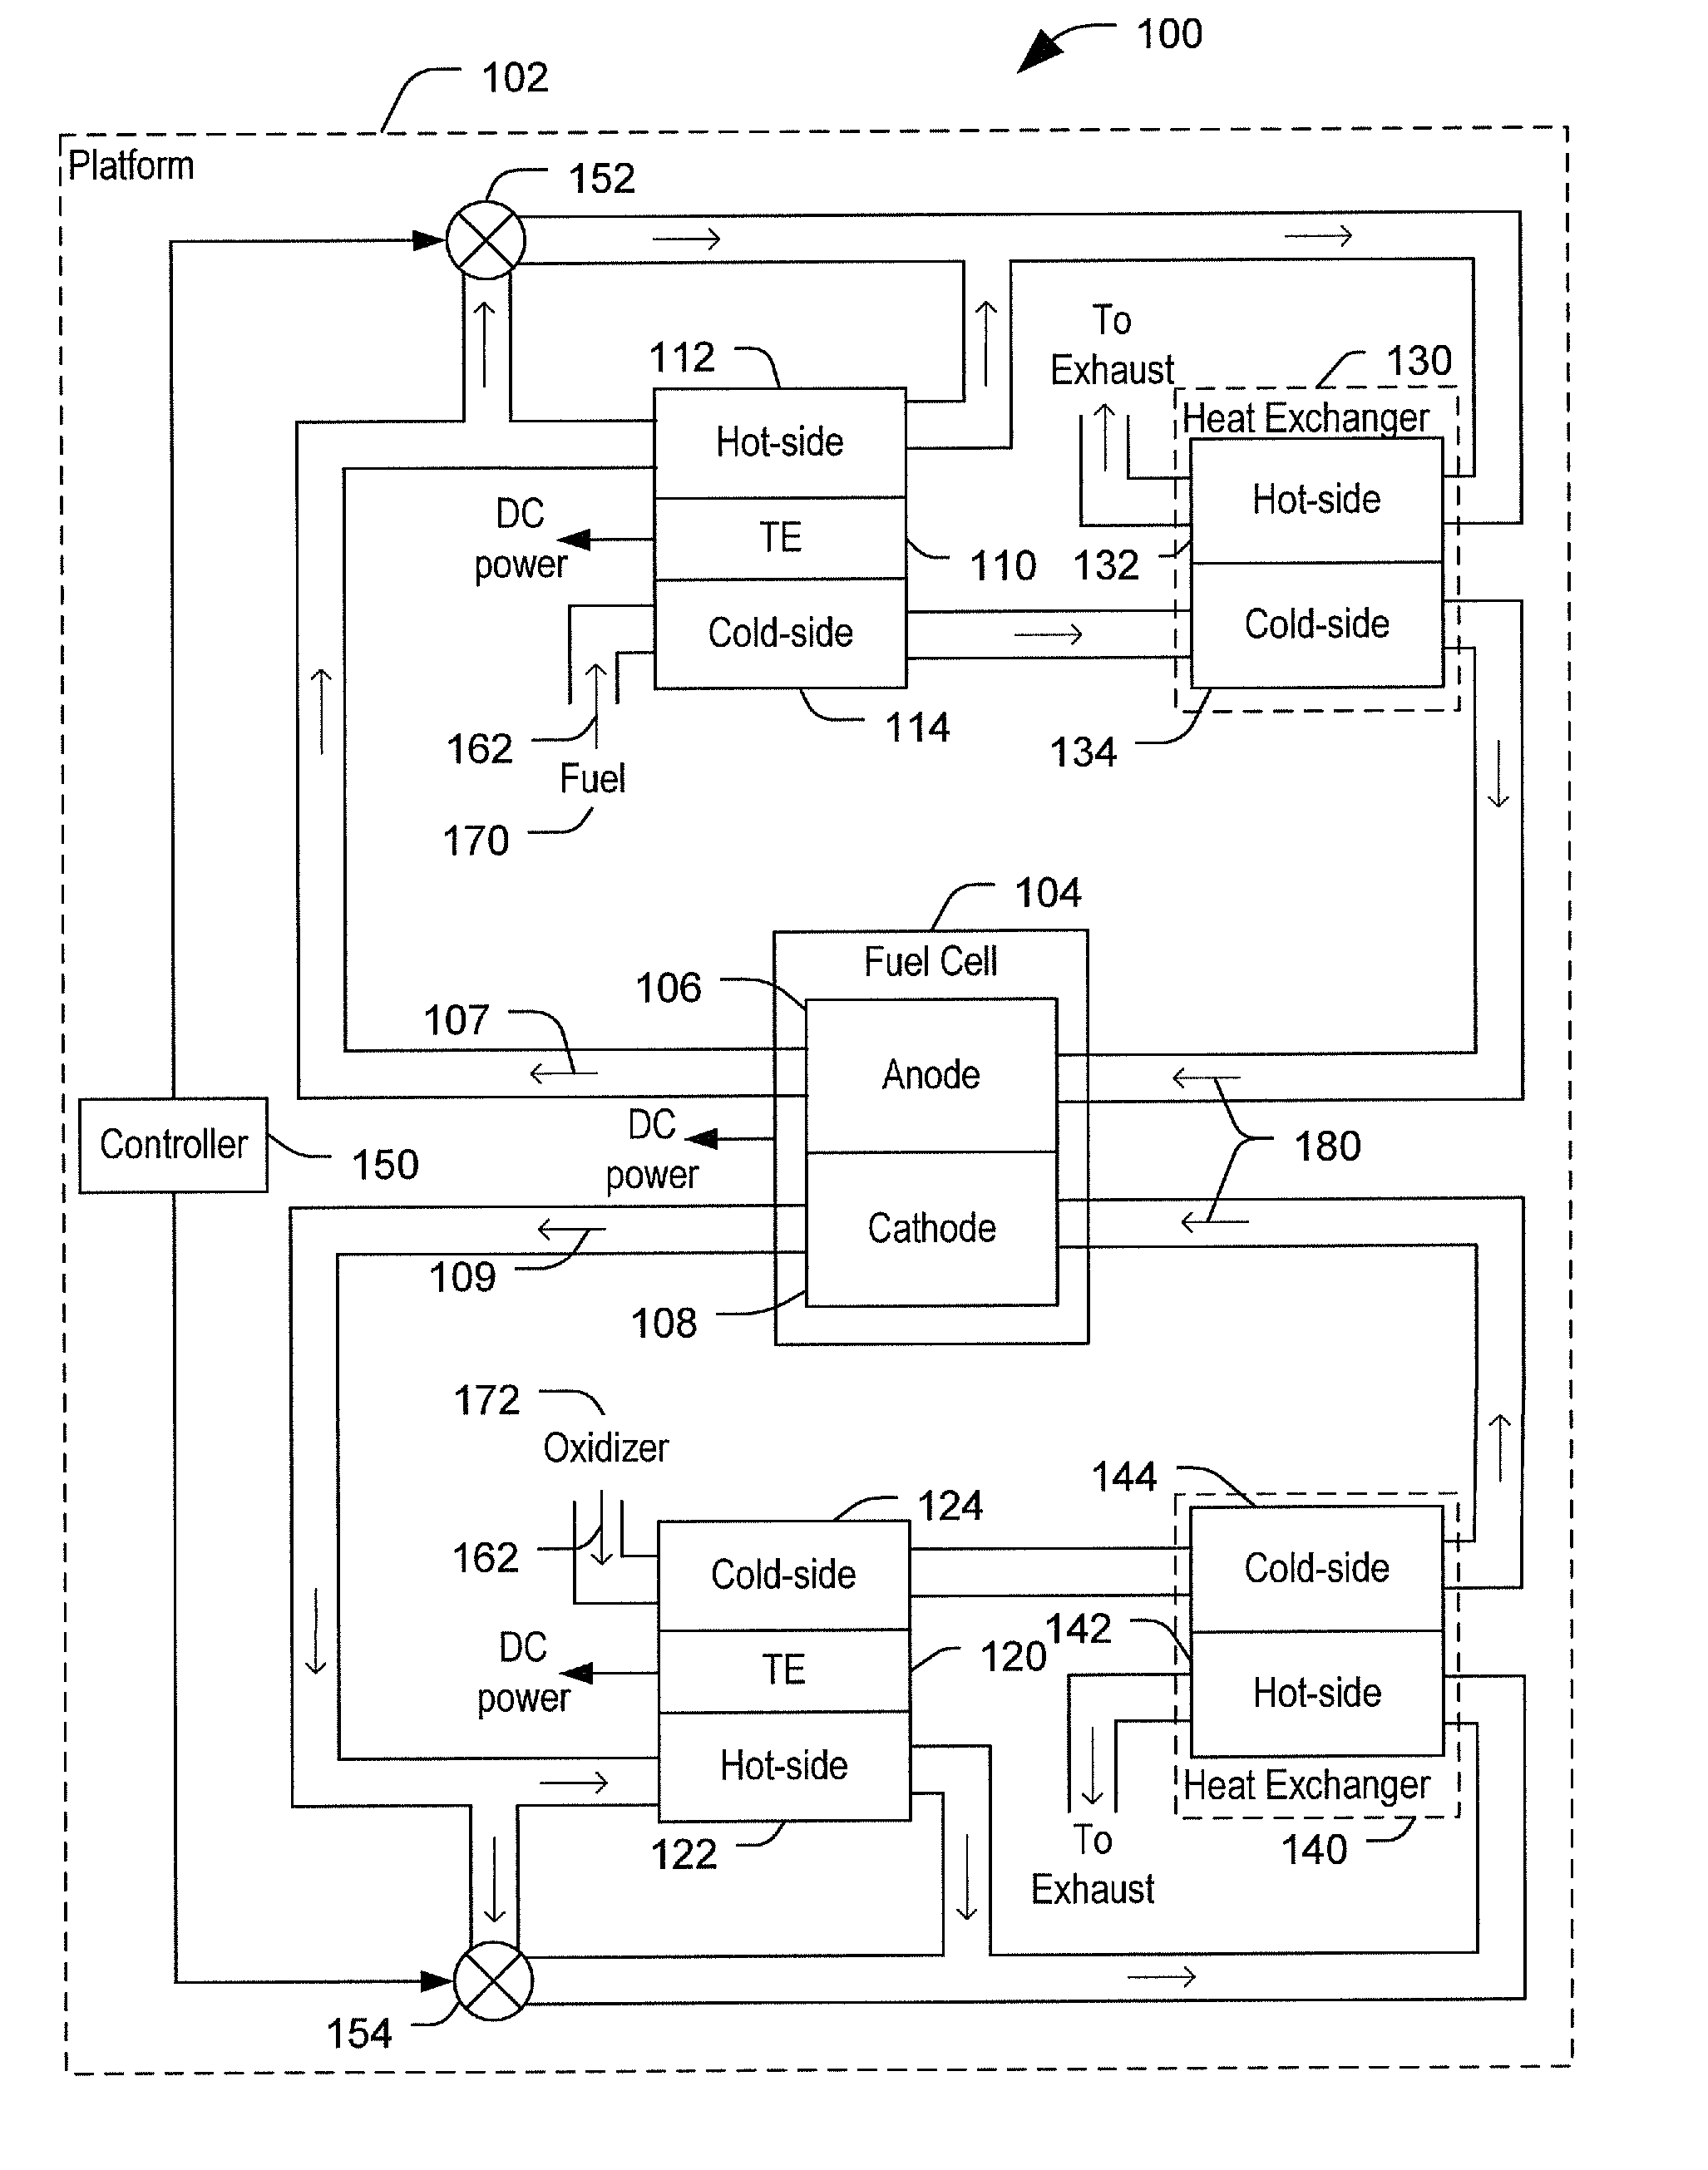 Thermoelectric generator and fuel cell for electric power co-generation